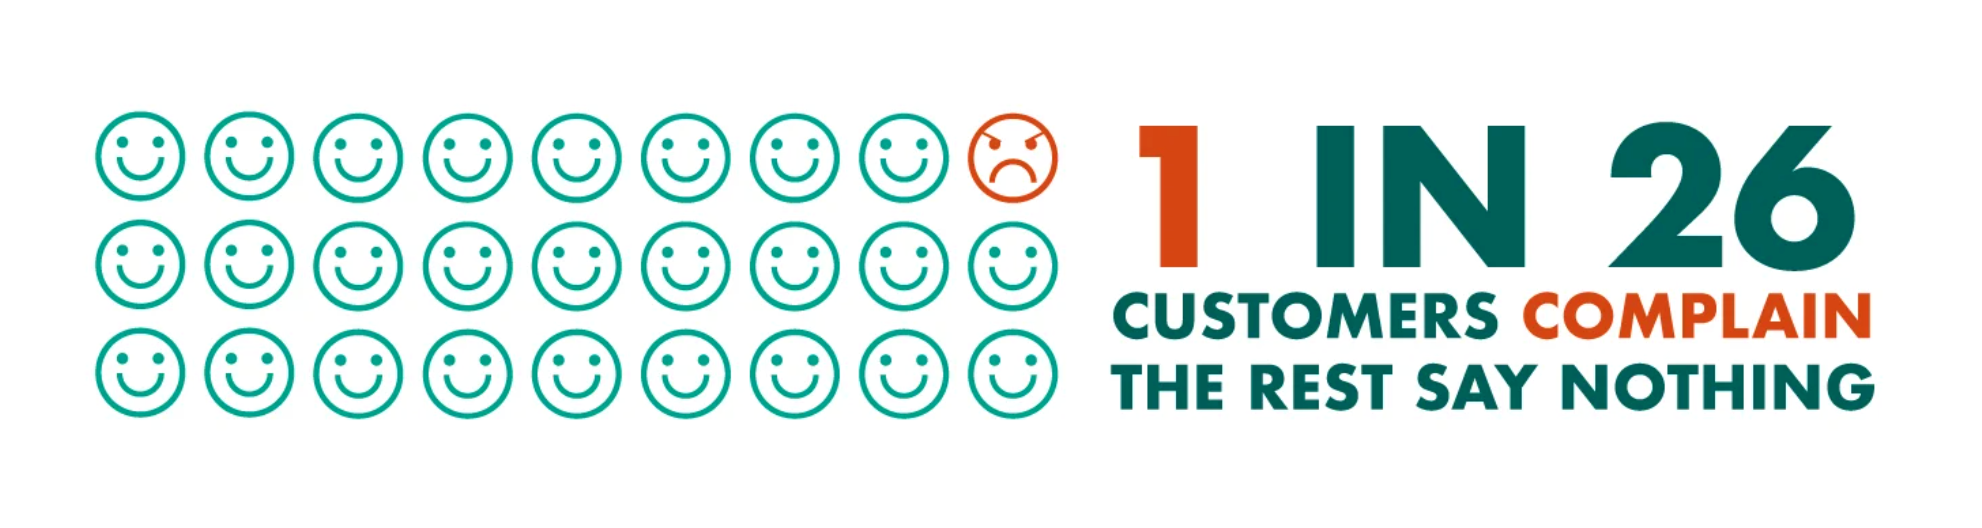 customer feedback management: why customers leave